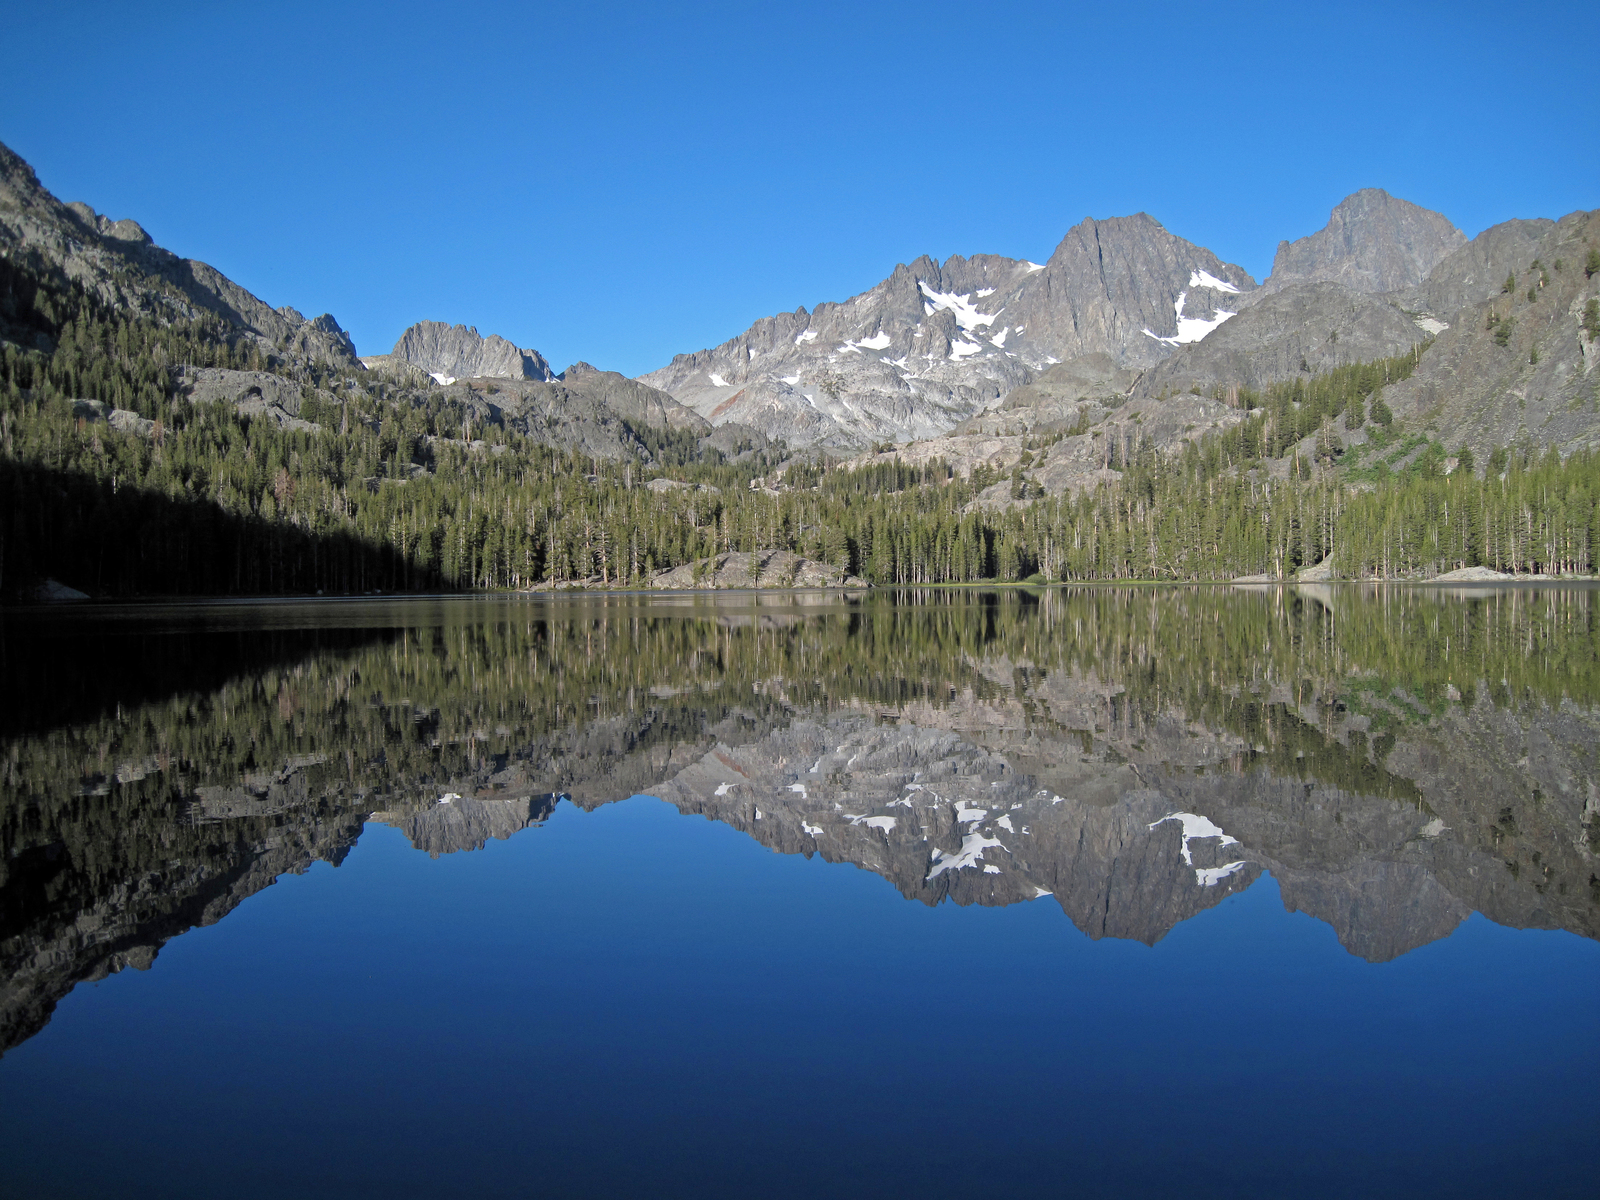 Mount Ritter and Banner Peak, reflected on Shadow Lake, Ansel Adams Wilderness, CA